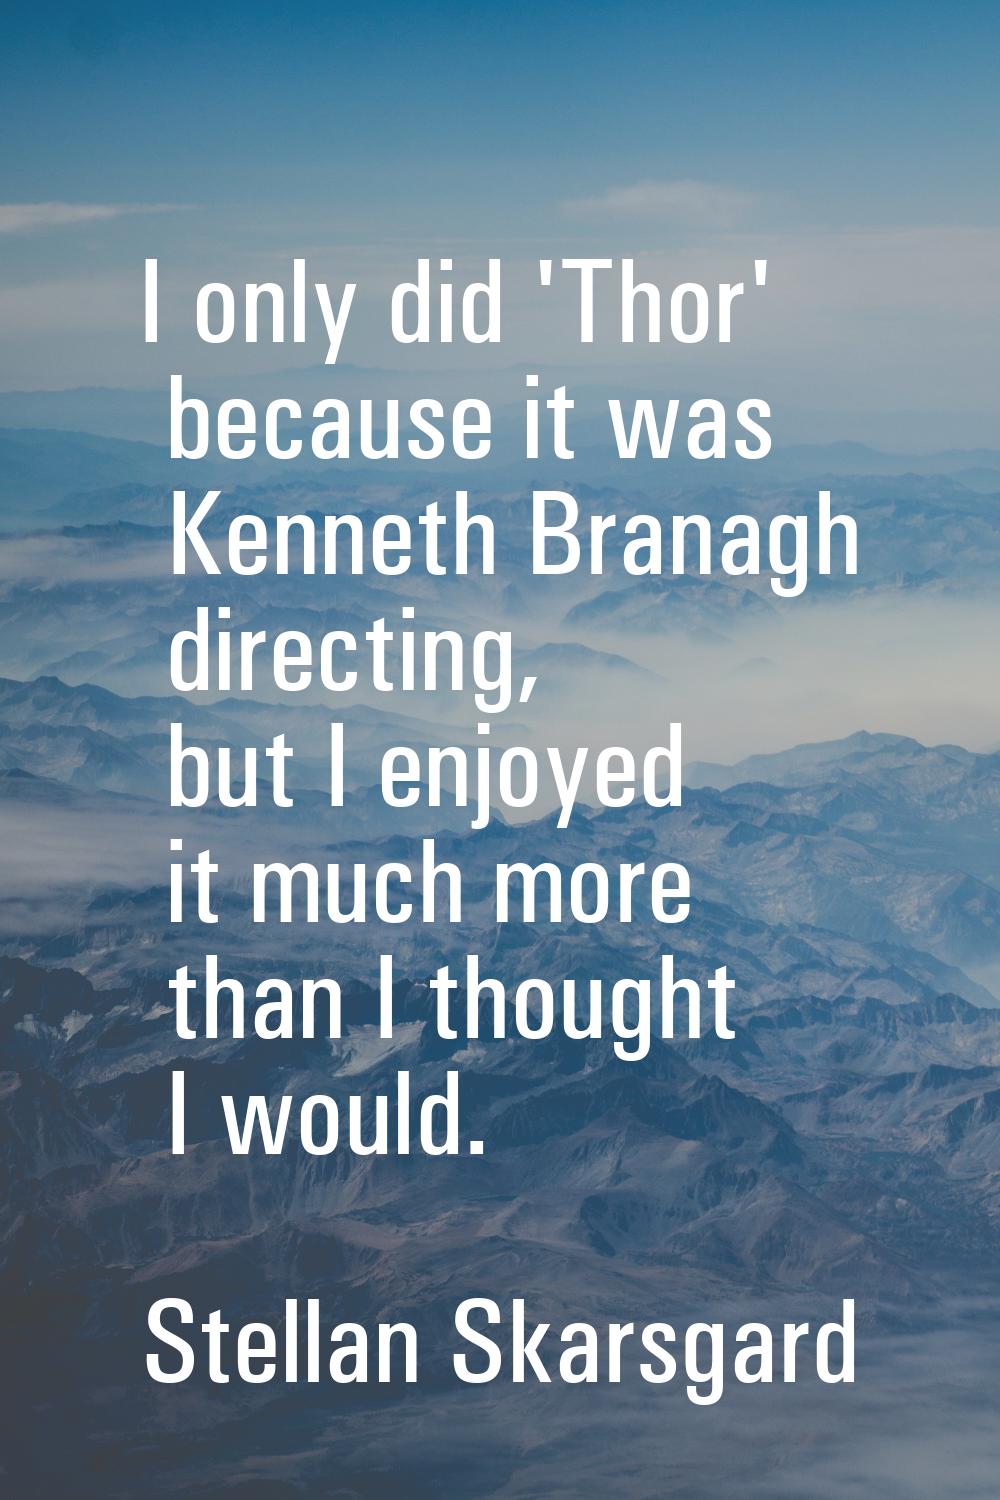 I only did 'Thor' because it was Kenneth Branagh directing, but I enjoyed it much more than I thoug